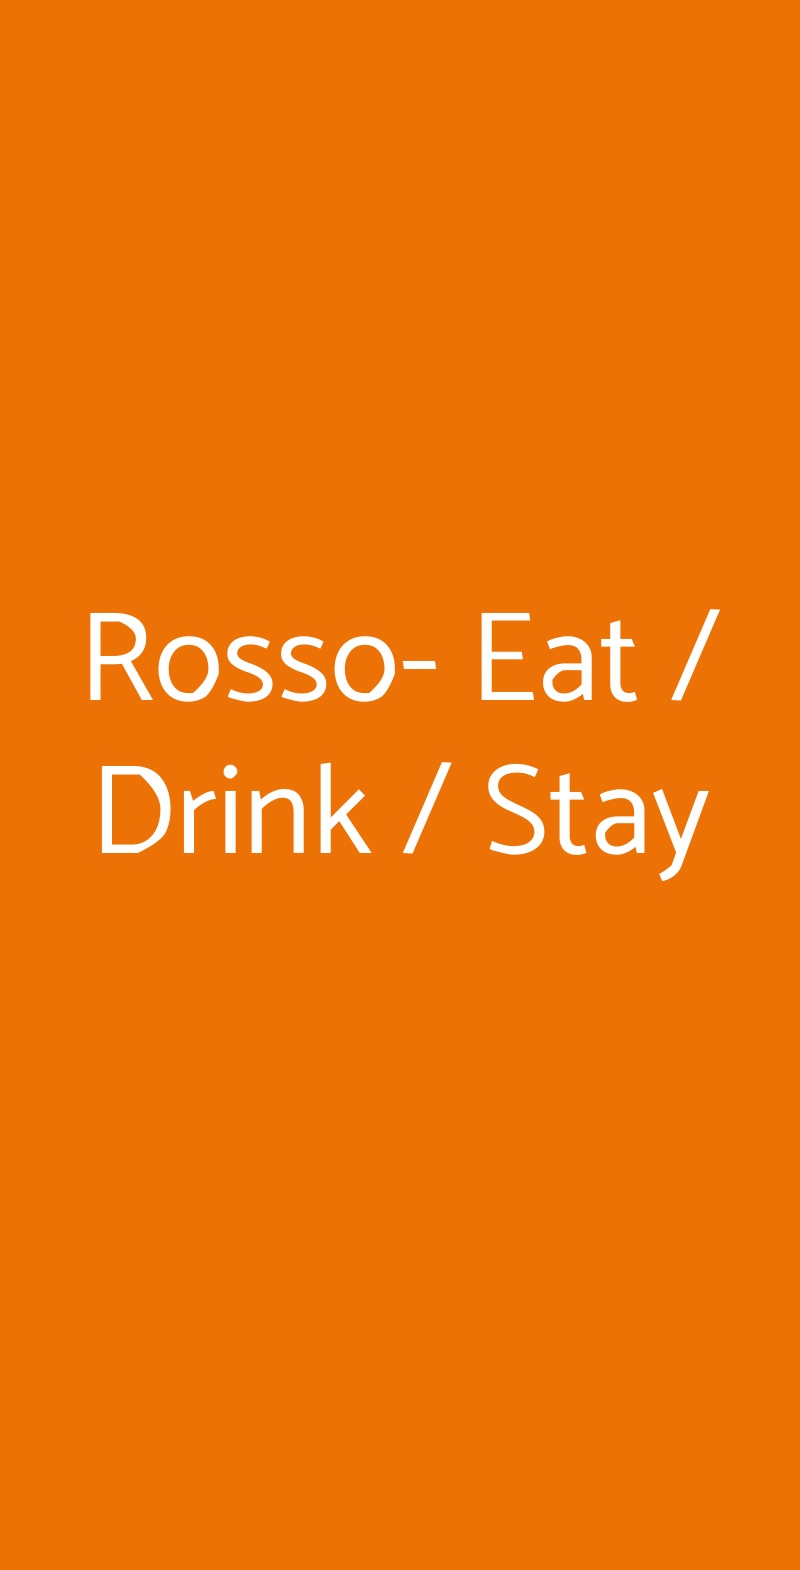 Rosso- Eat / Drink / Stay Roma menù 1 pagina